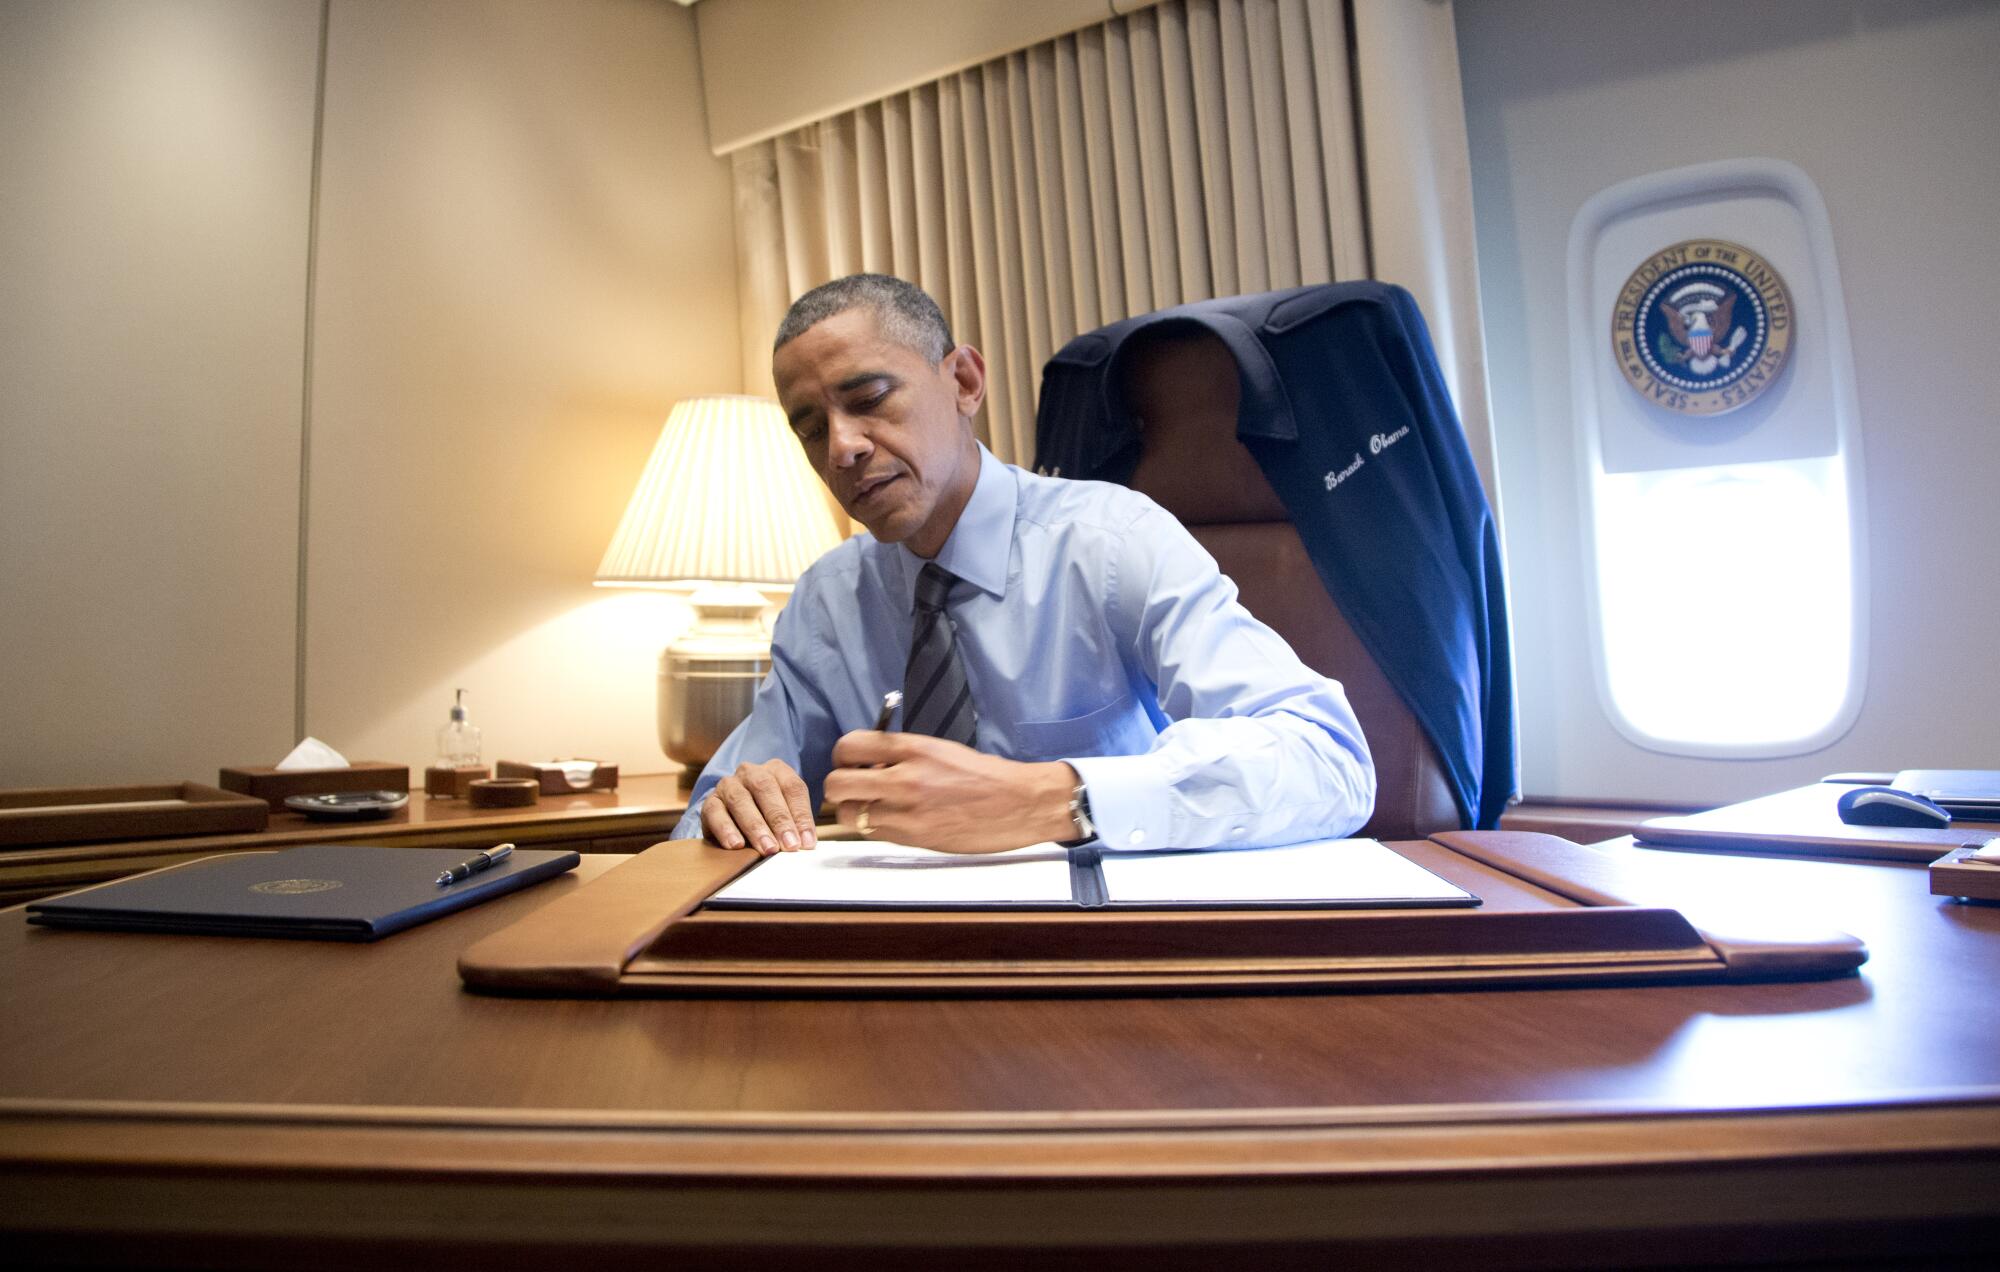 President Obama signing documents at a desk on Air Force One